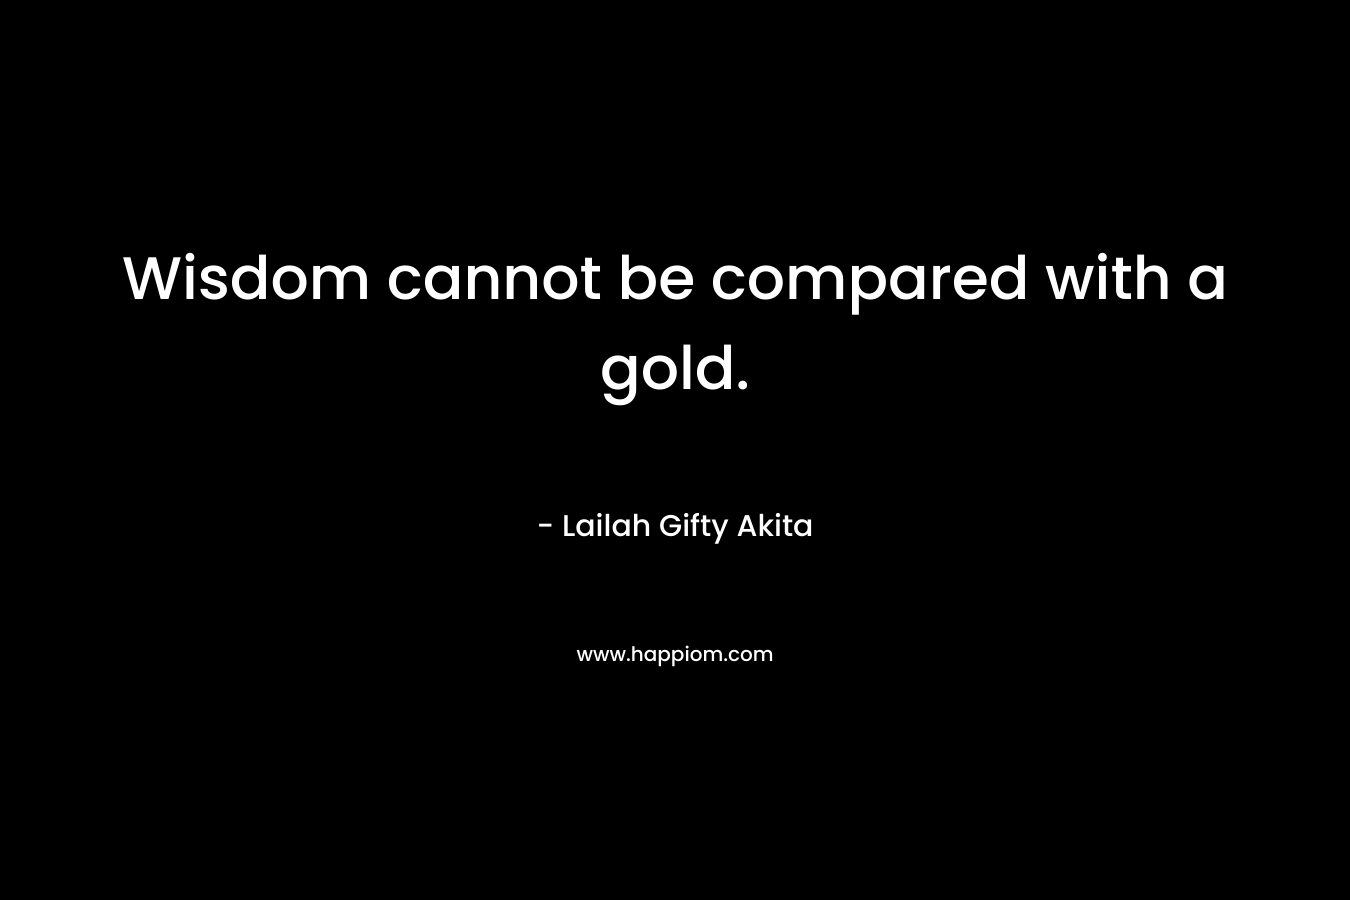 Wisdom cannot be compared with a gold.